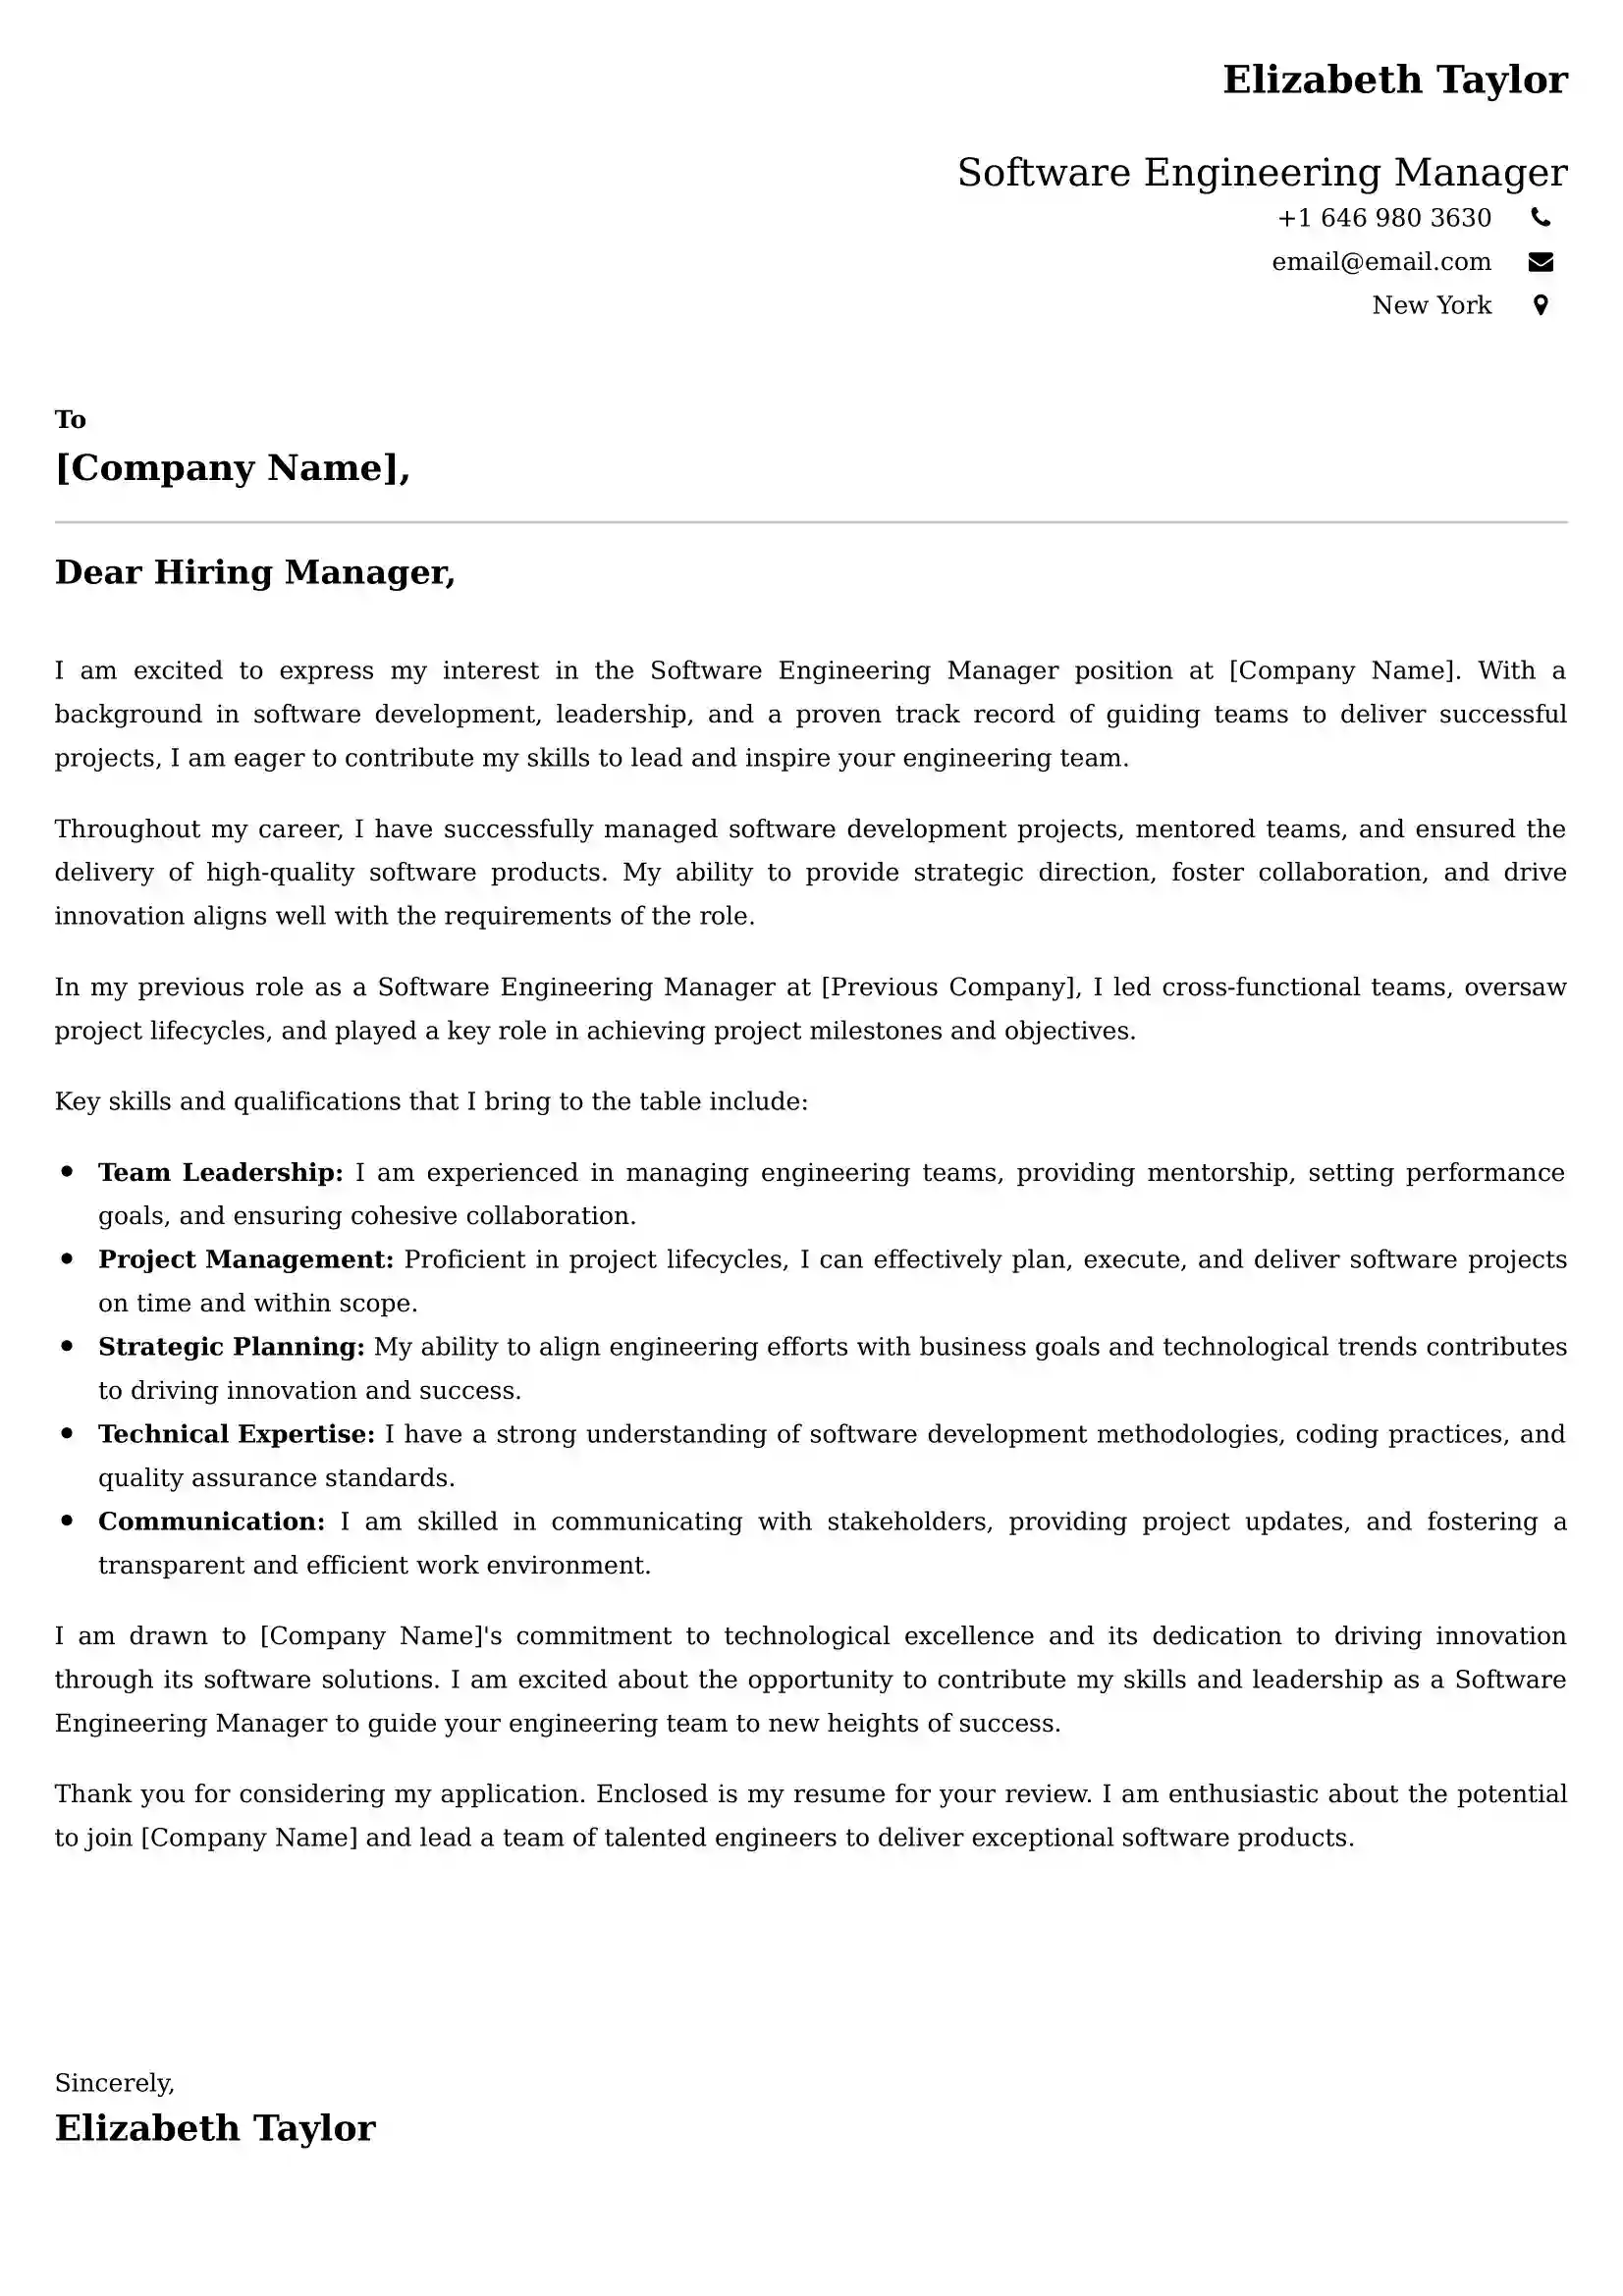 Software Engineering Manager Cover Letter Examples - Latest UK Format